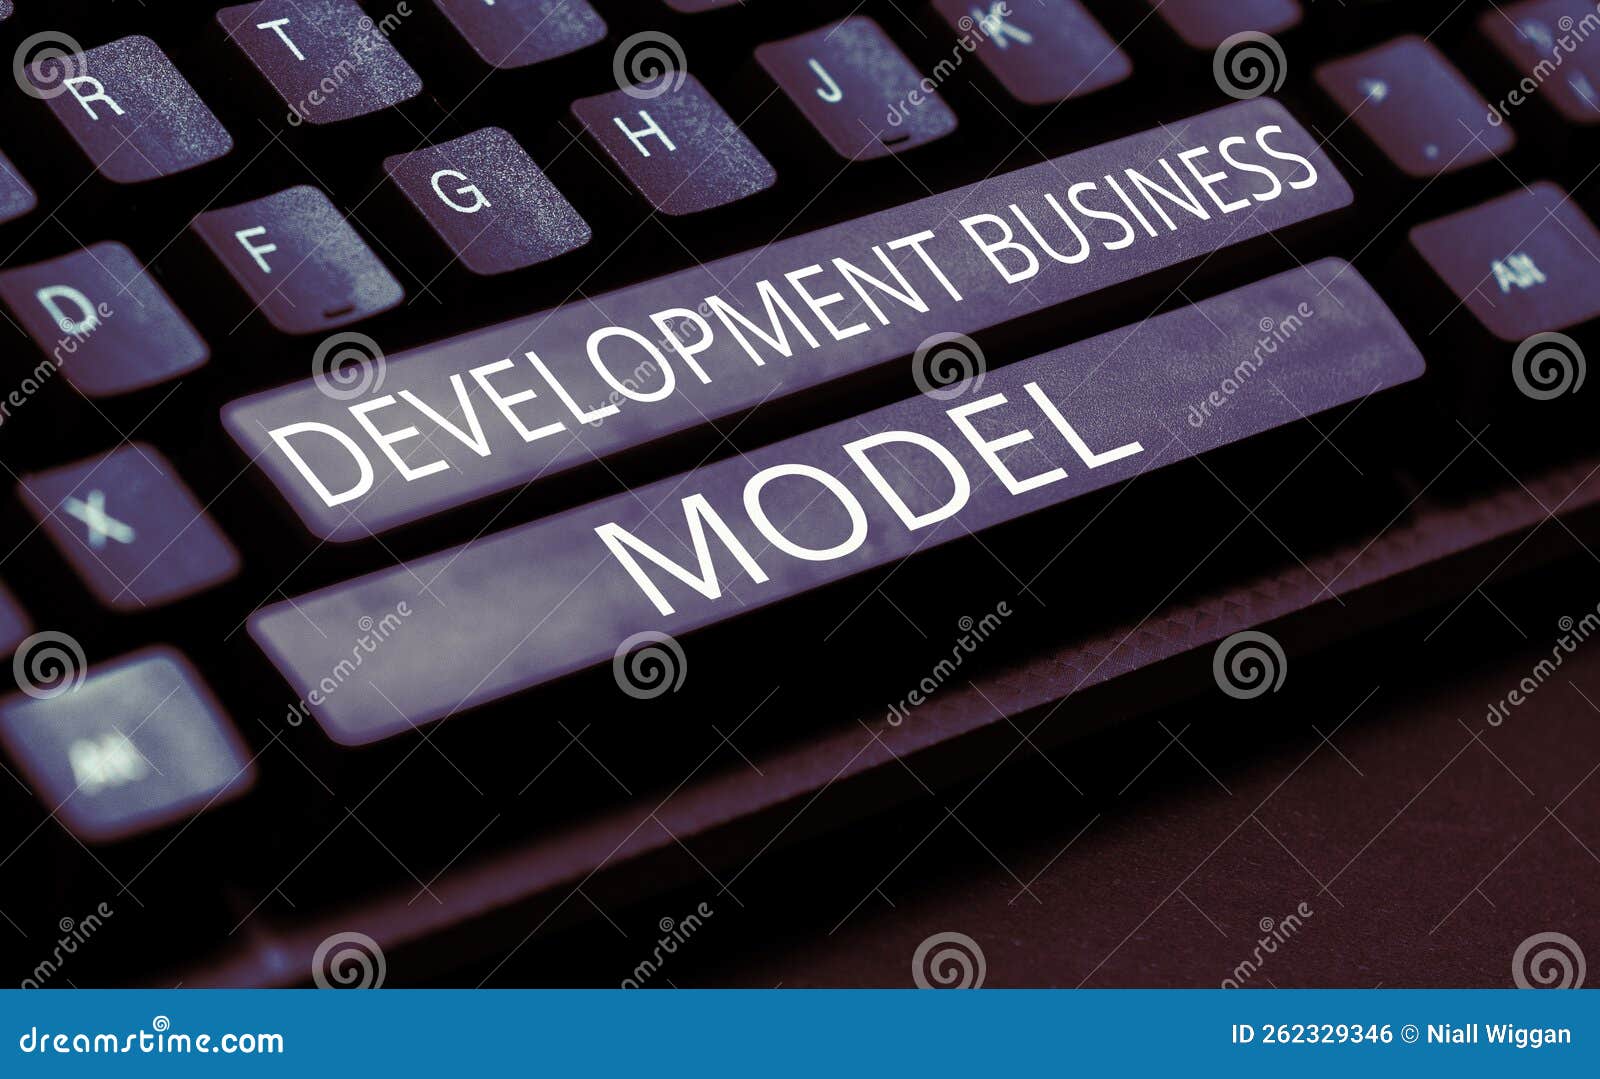 writing displaying text development business model. business idea rationale of how an organization created